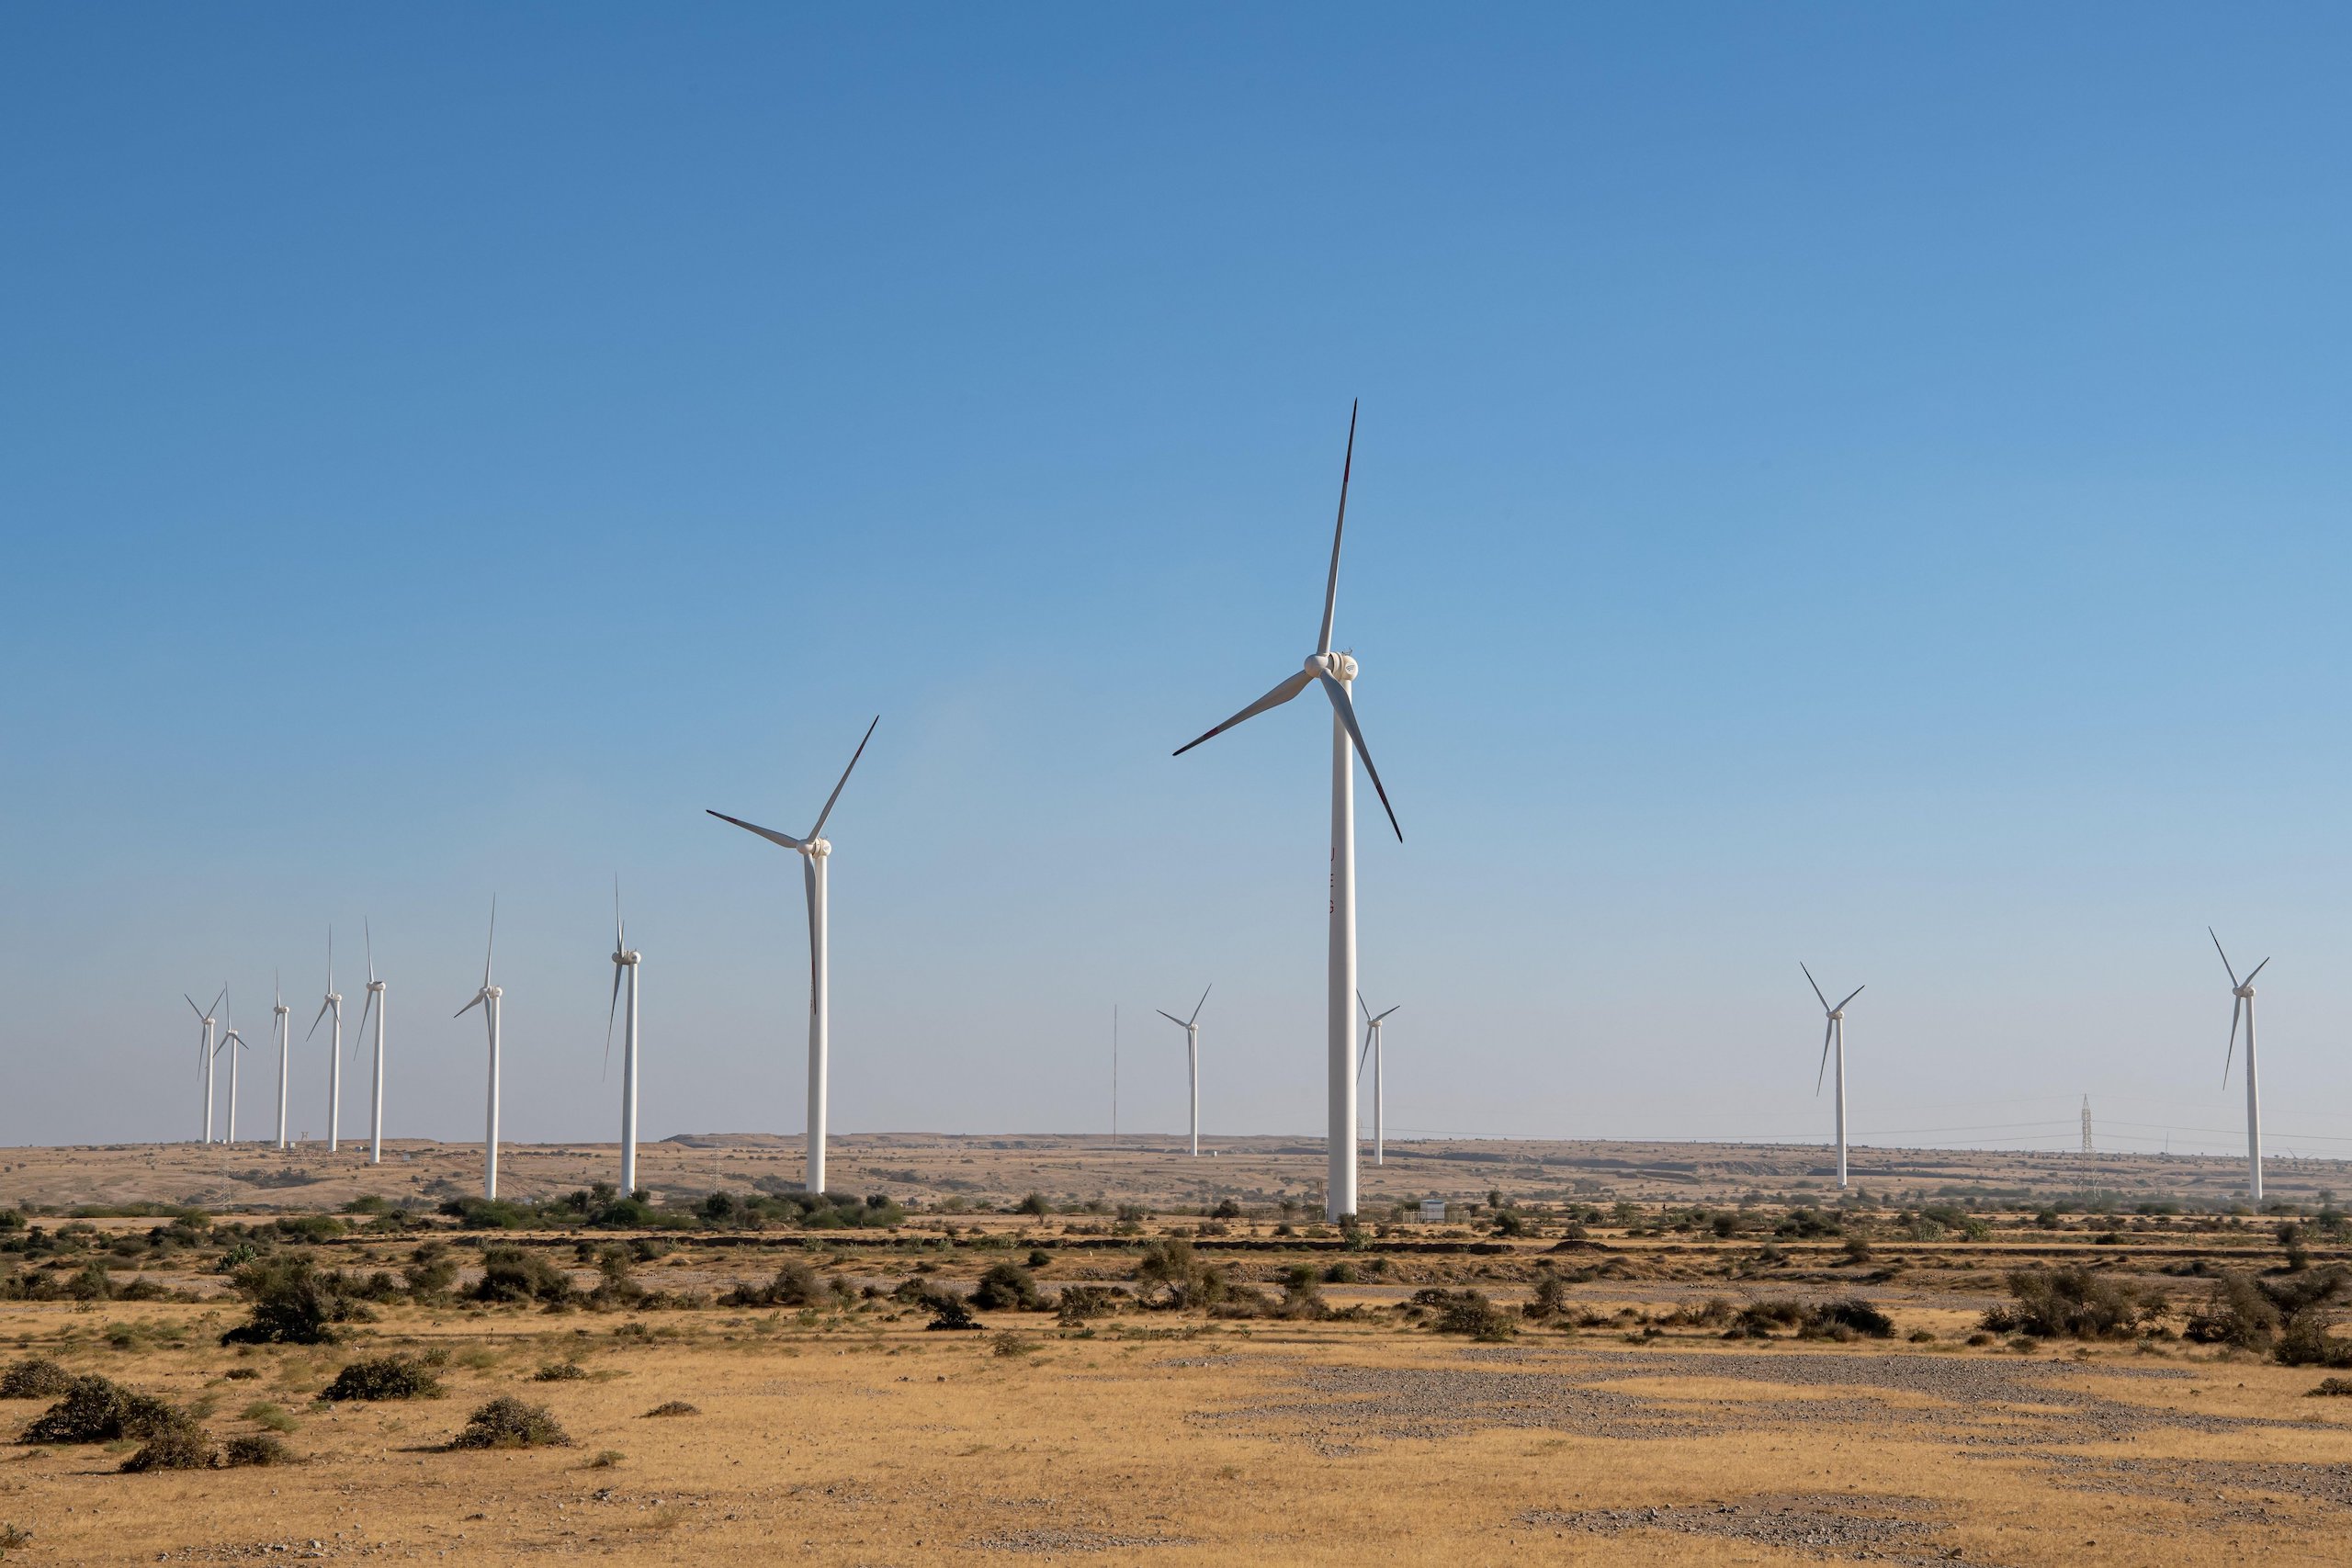 <p>A wind power plant in Jhimpir, southern Pakistan. Wind projects in this region have been one of several renewable energy projects to have received Chinese investment in recent years. (Image: Hasan Zaidi / Alamy)</p>